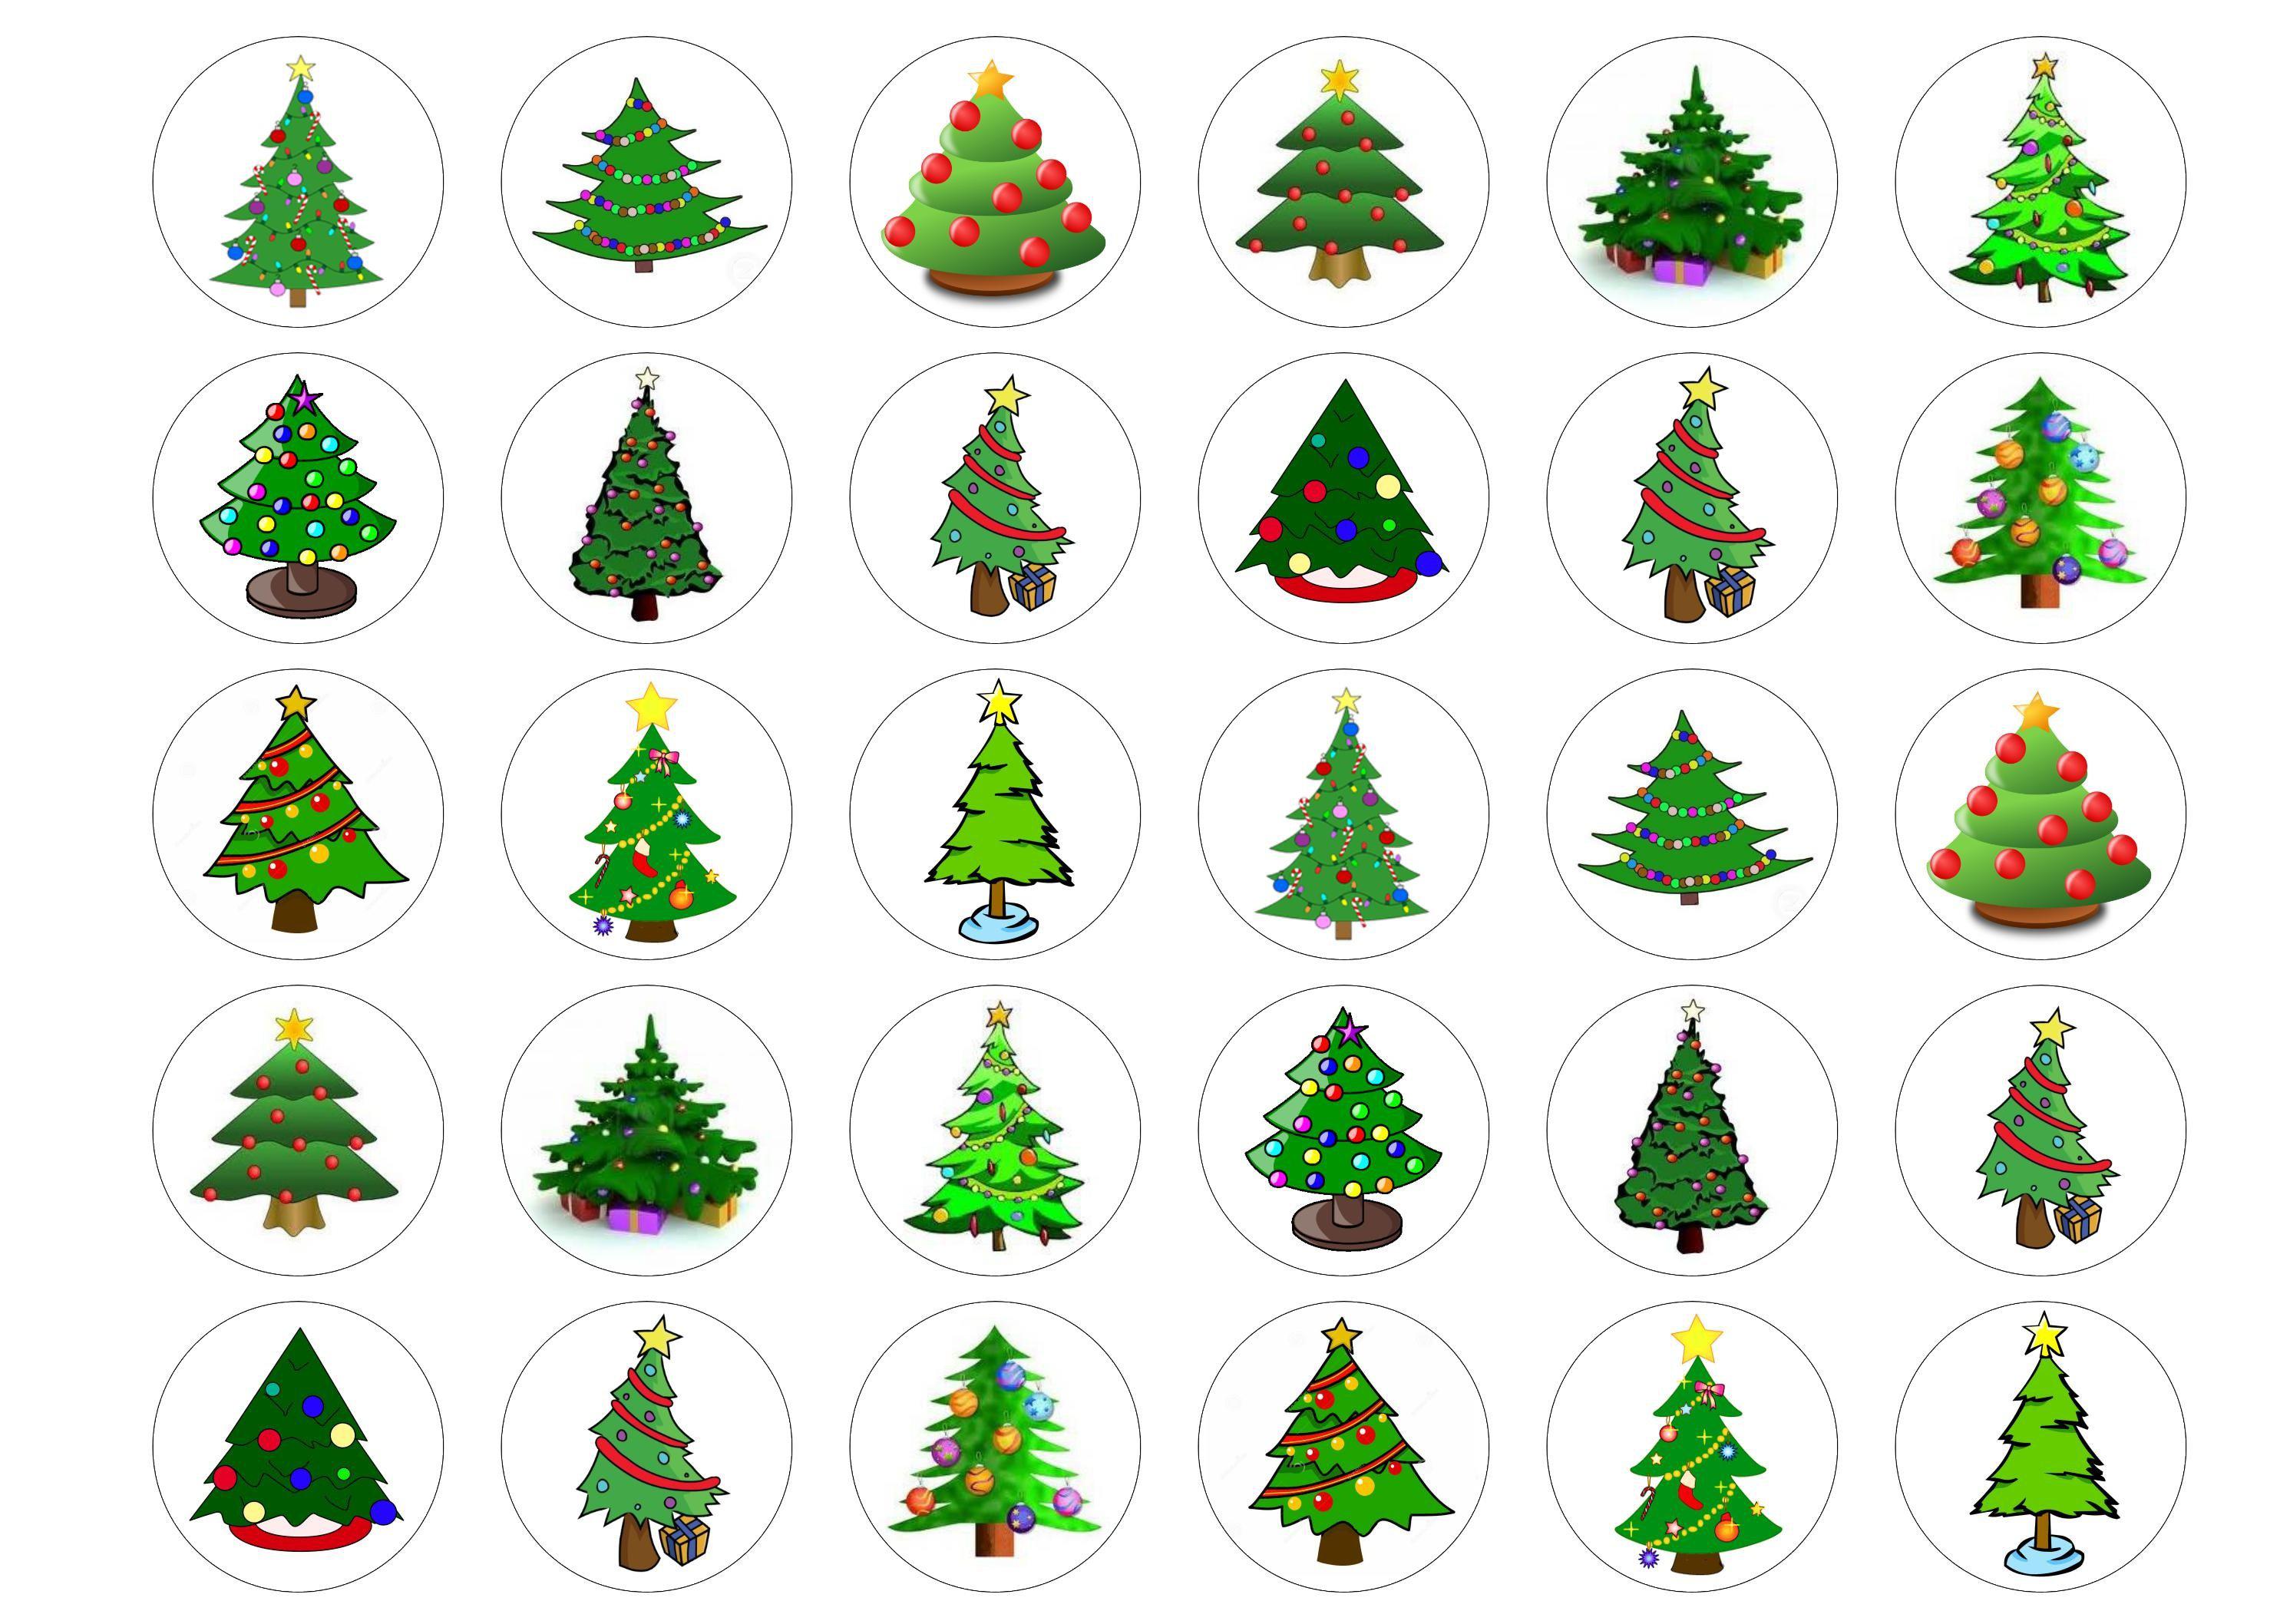 30 edible cupcake toppers with cartoon Christmas Trees